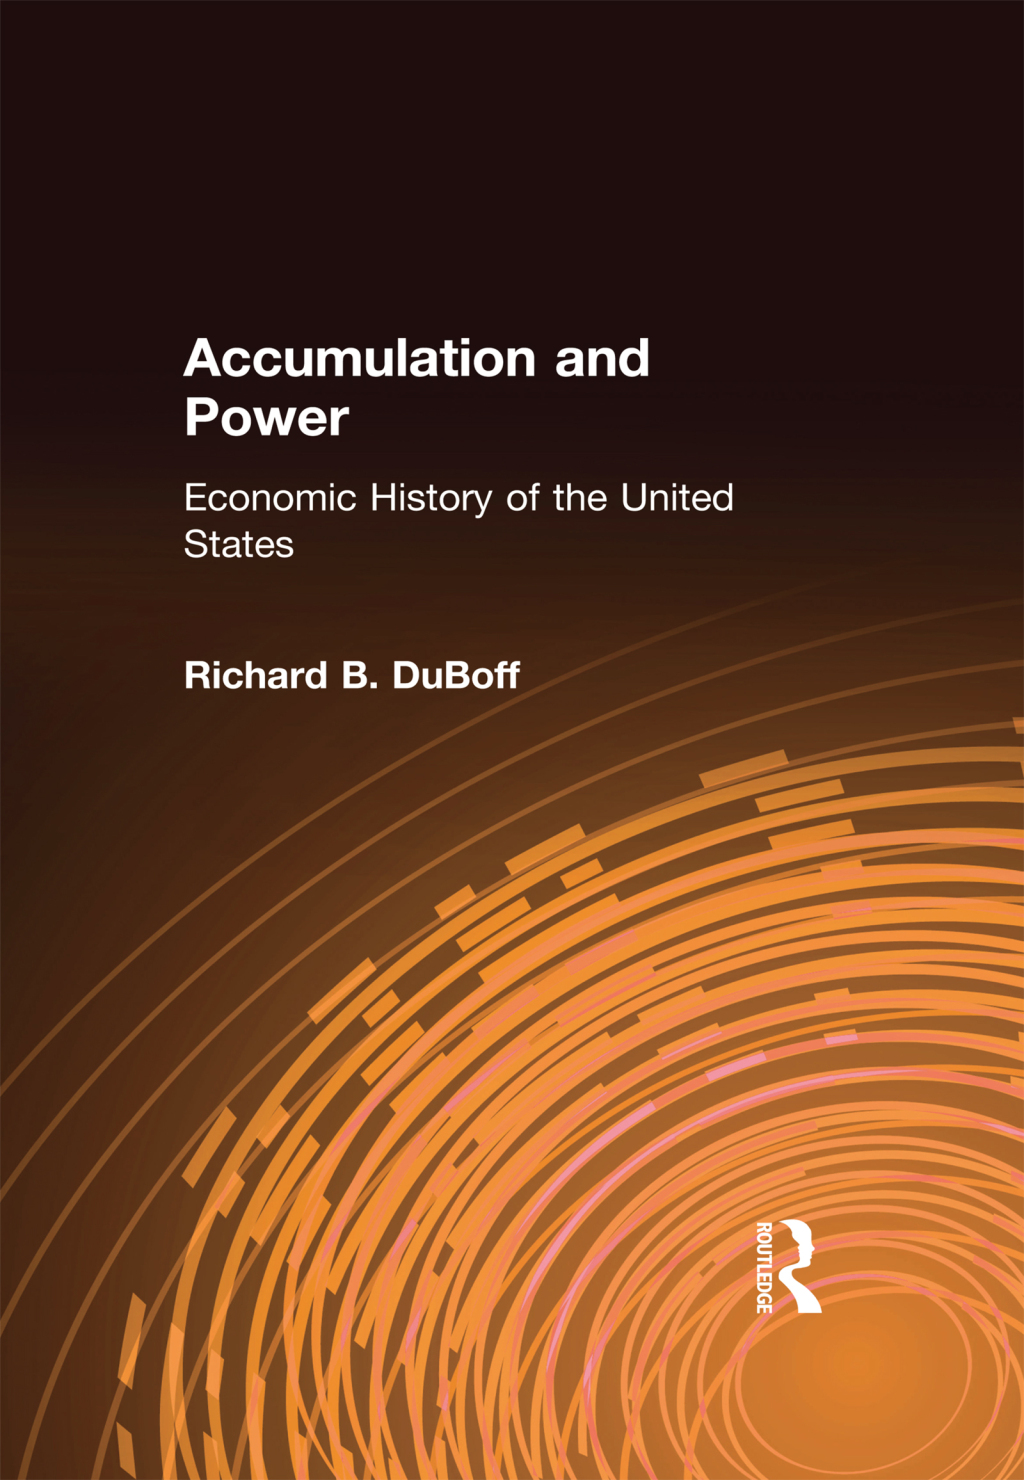 Accumulation and Power: Economic History of the United States (eBook) - Richard B. DuBoff